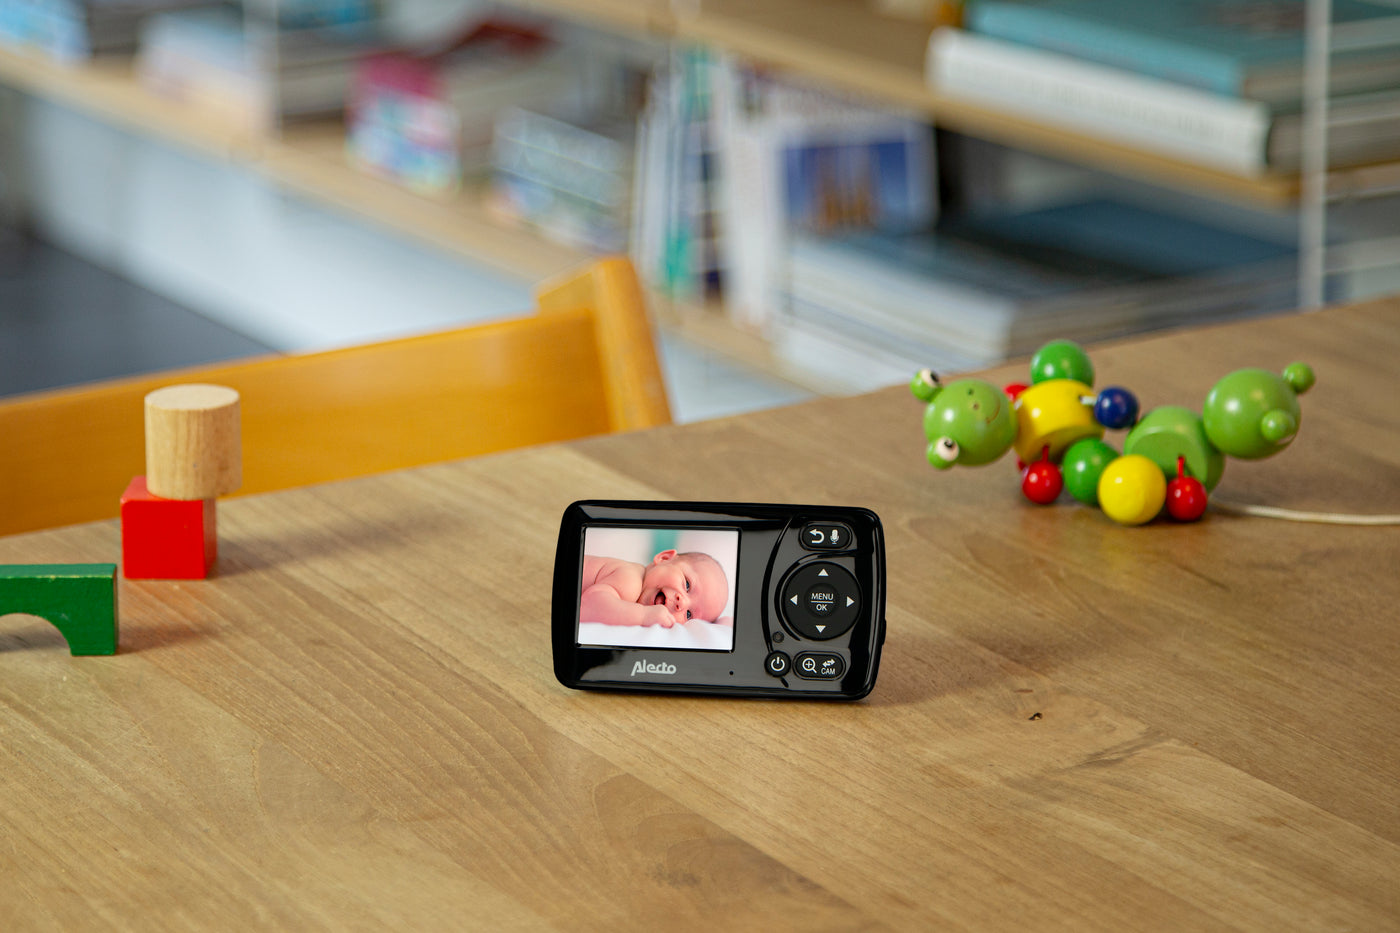 Alecto DVM71BK - Video baby monitor with 2.4" colour display, black